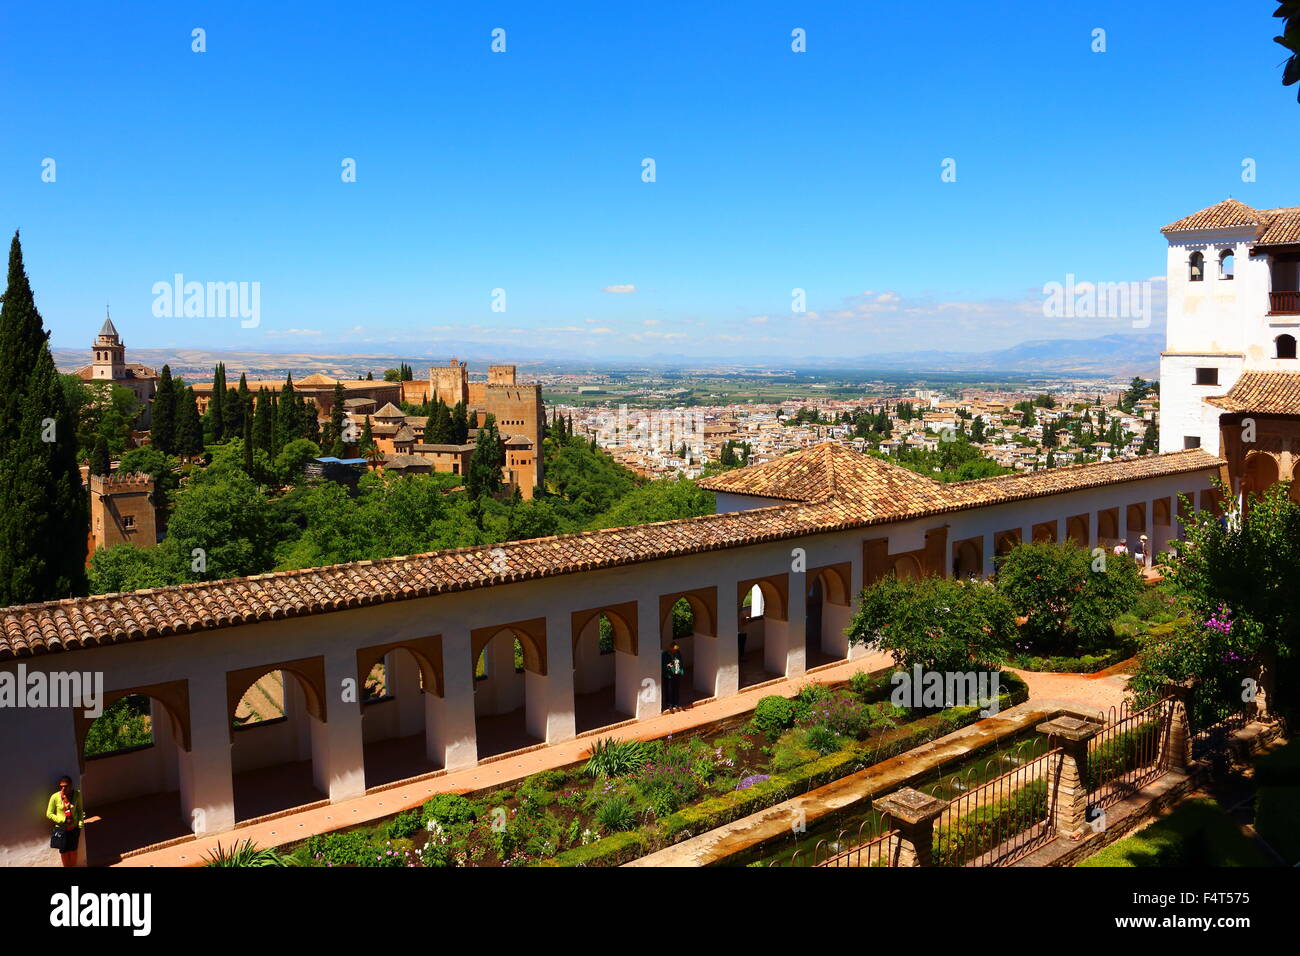 View of the Alhambra and Granada, from the Generalife gardens Stock Photo